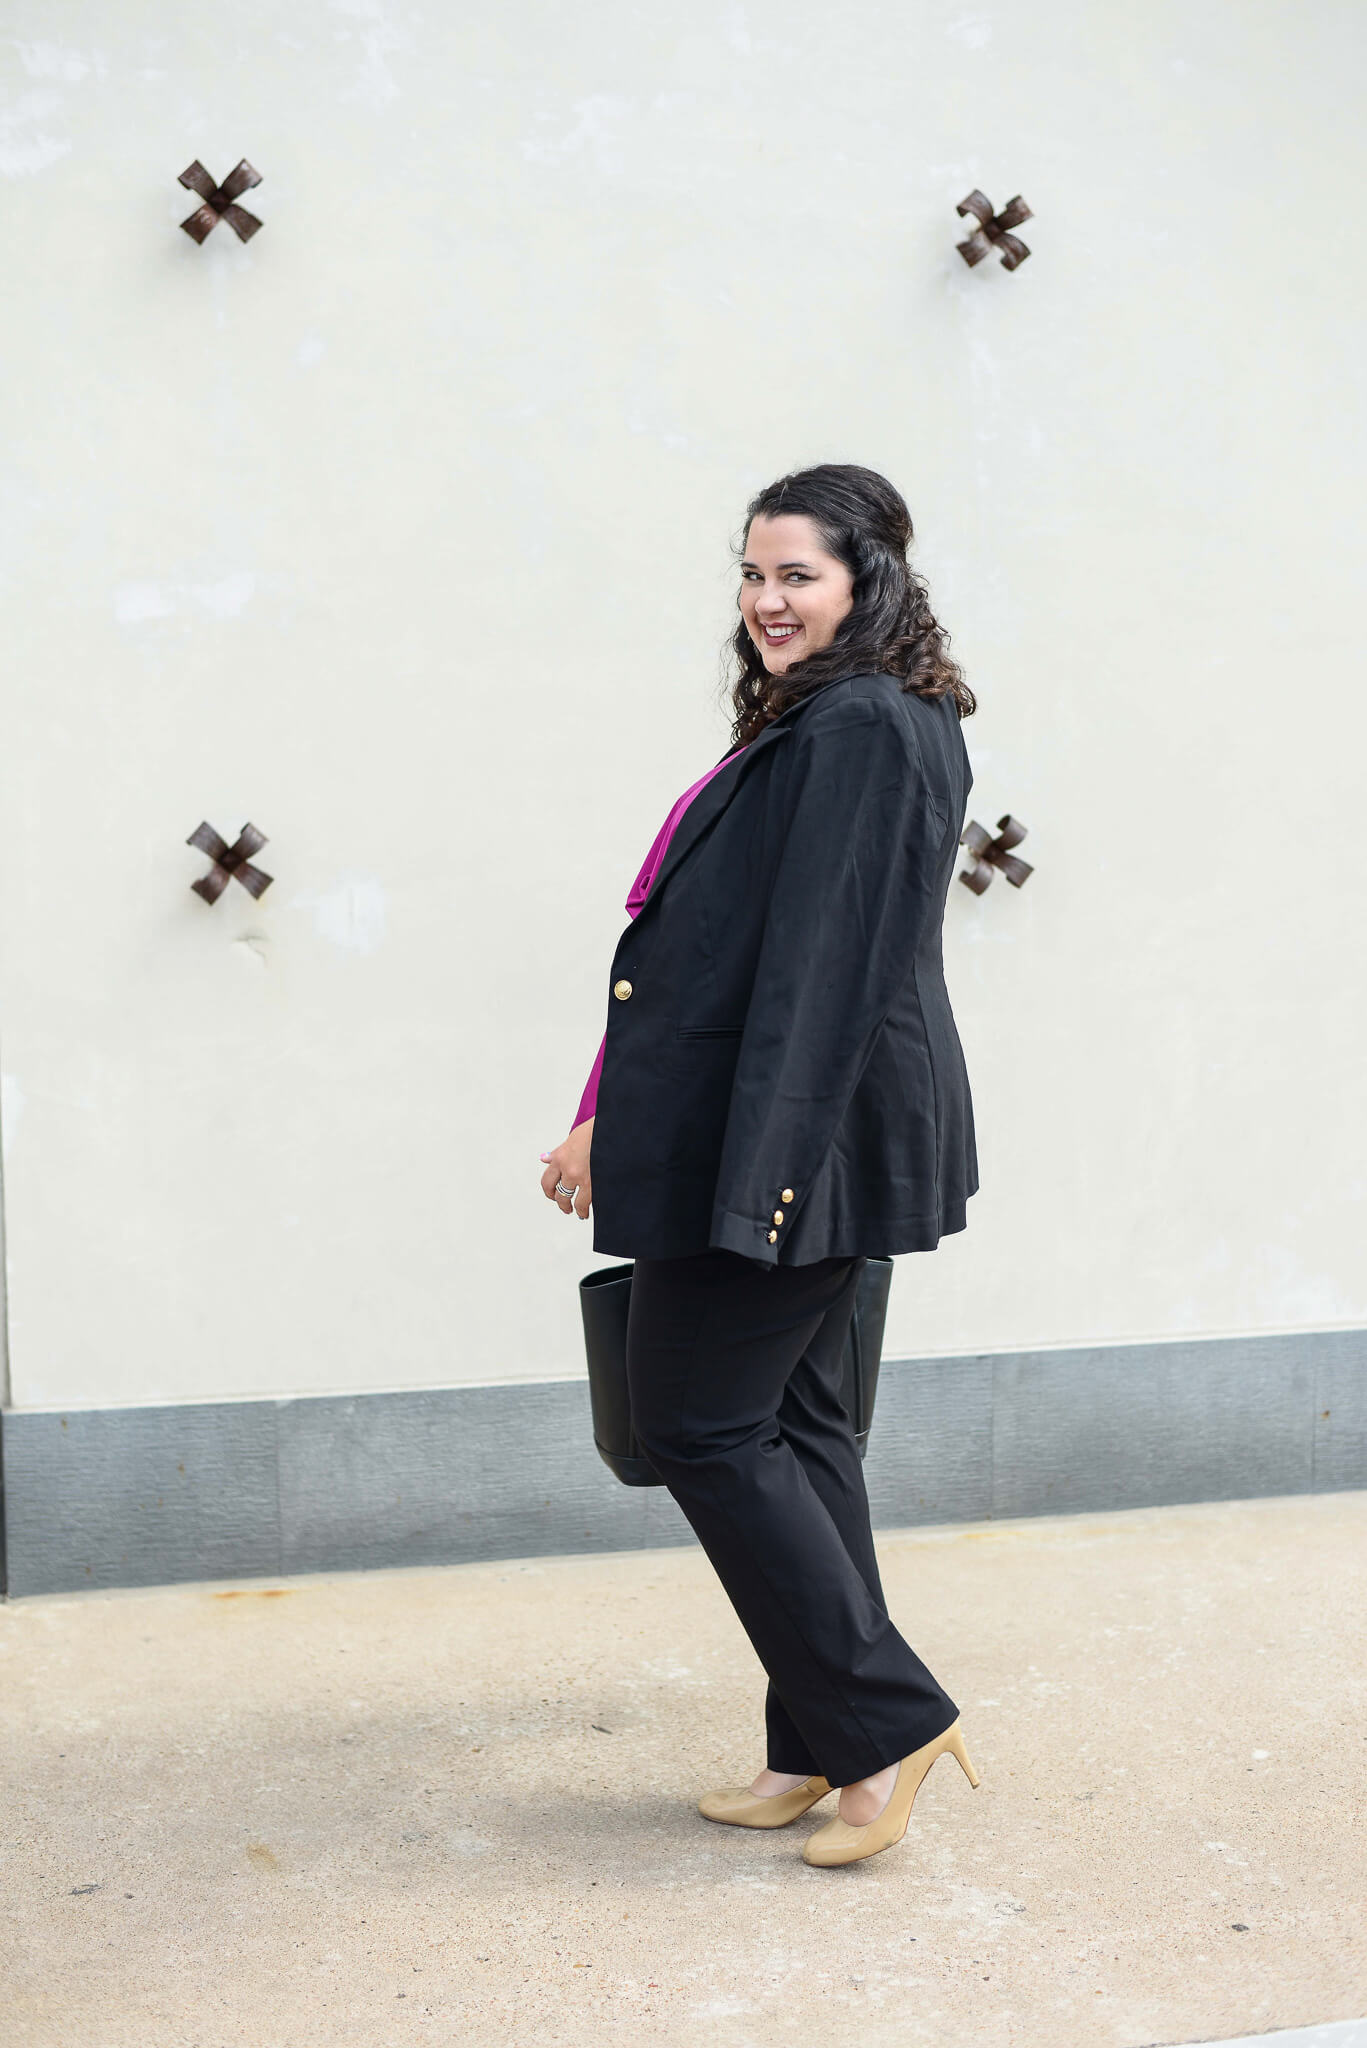 Finding a curvy work outfit has never been easier. Lane Bryant now has a dedicated work section to find the pieces that work best for your office environment. 